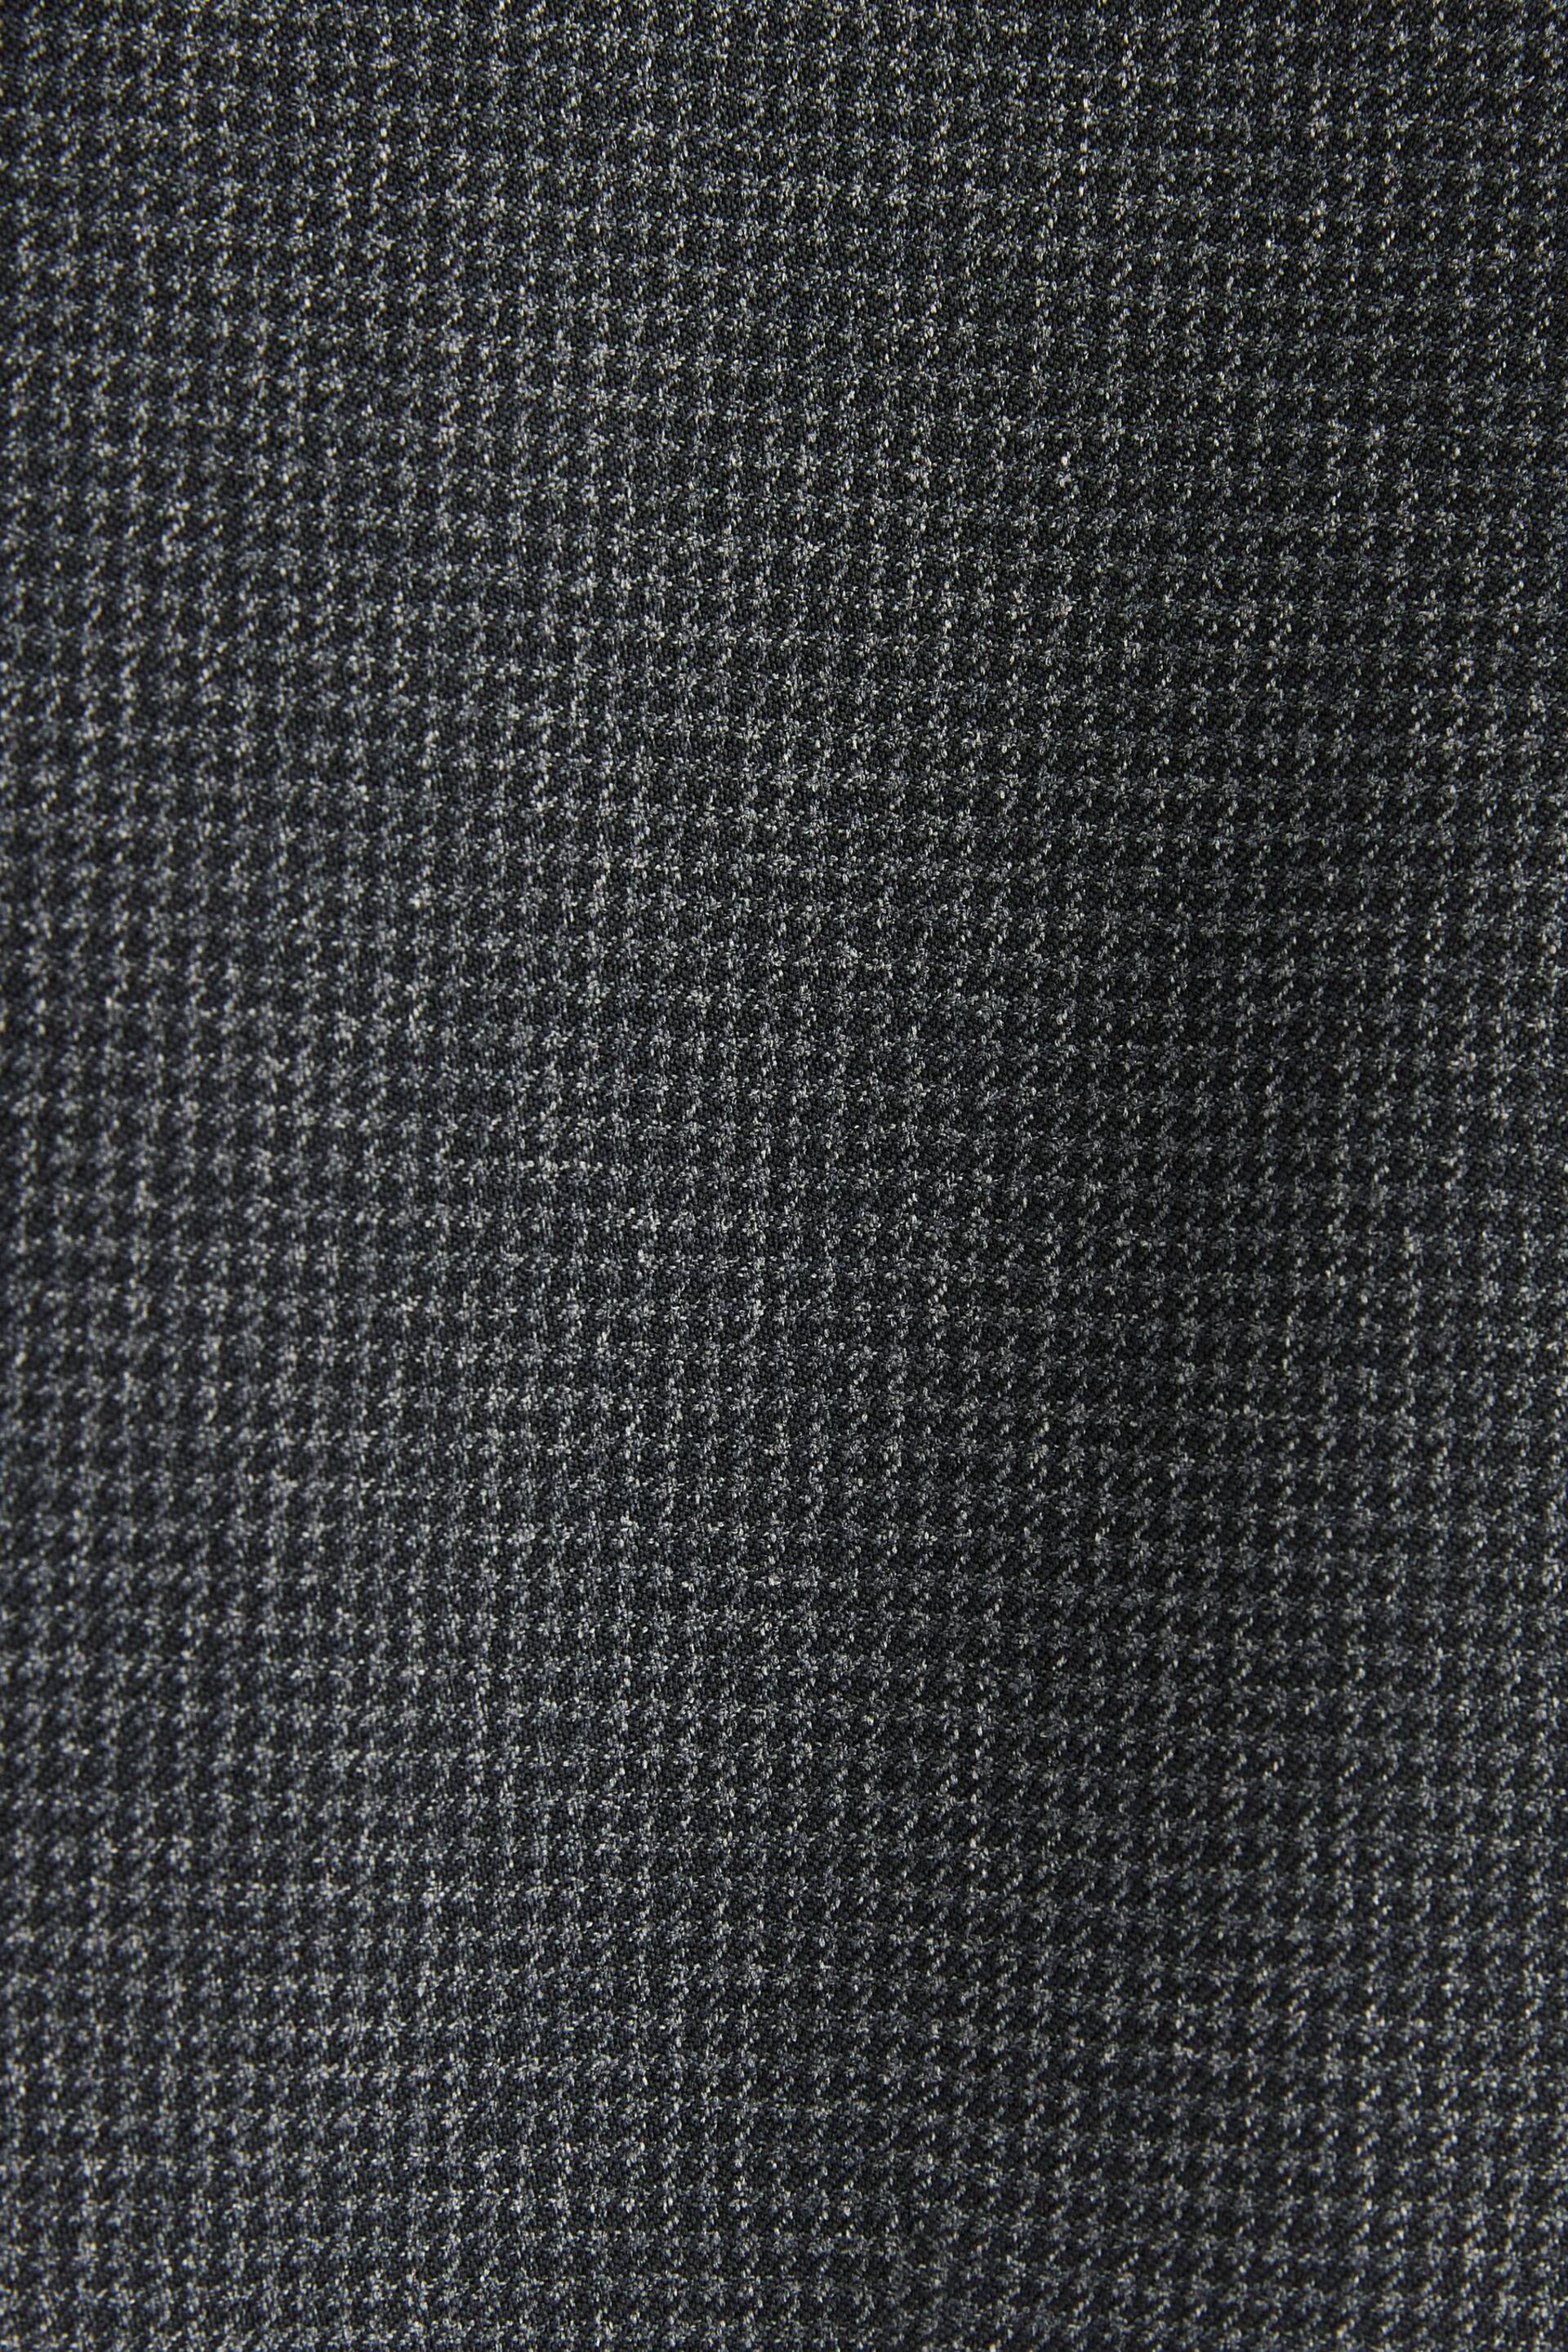 Charcoal Grey Puppytooth Fabric Suit Waistcoat - Image 10 of 11